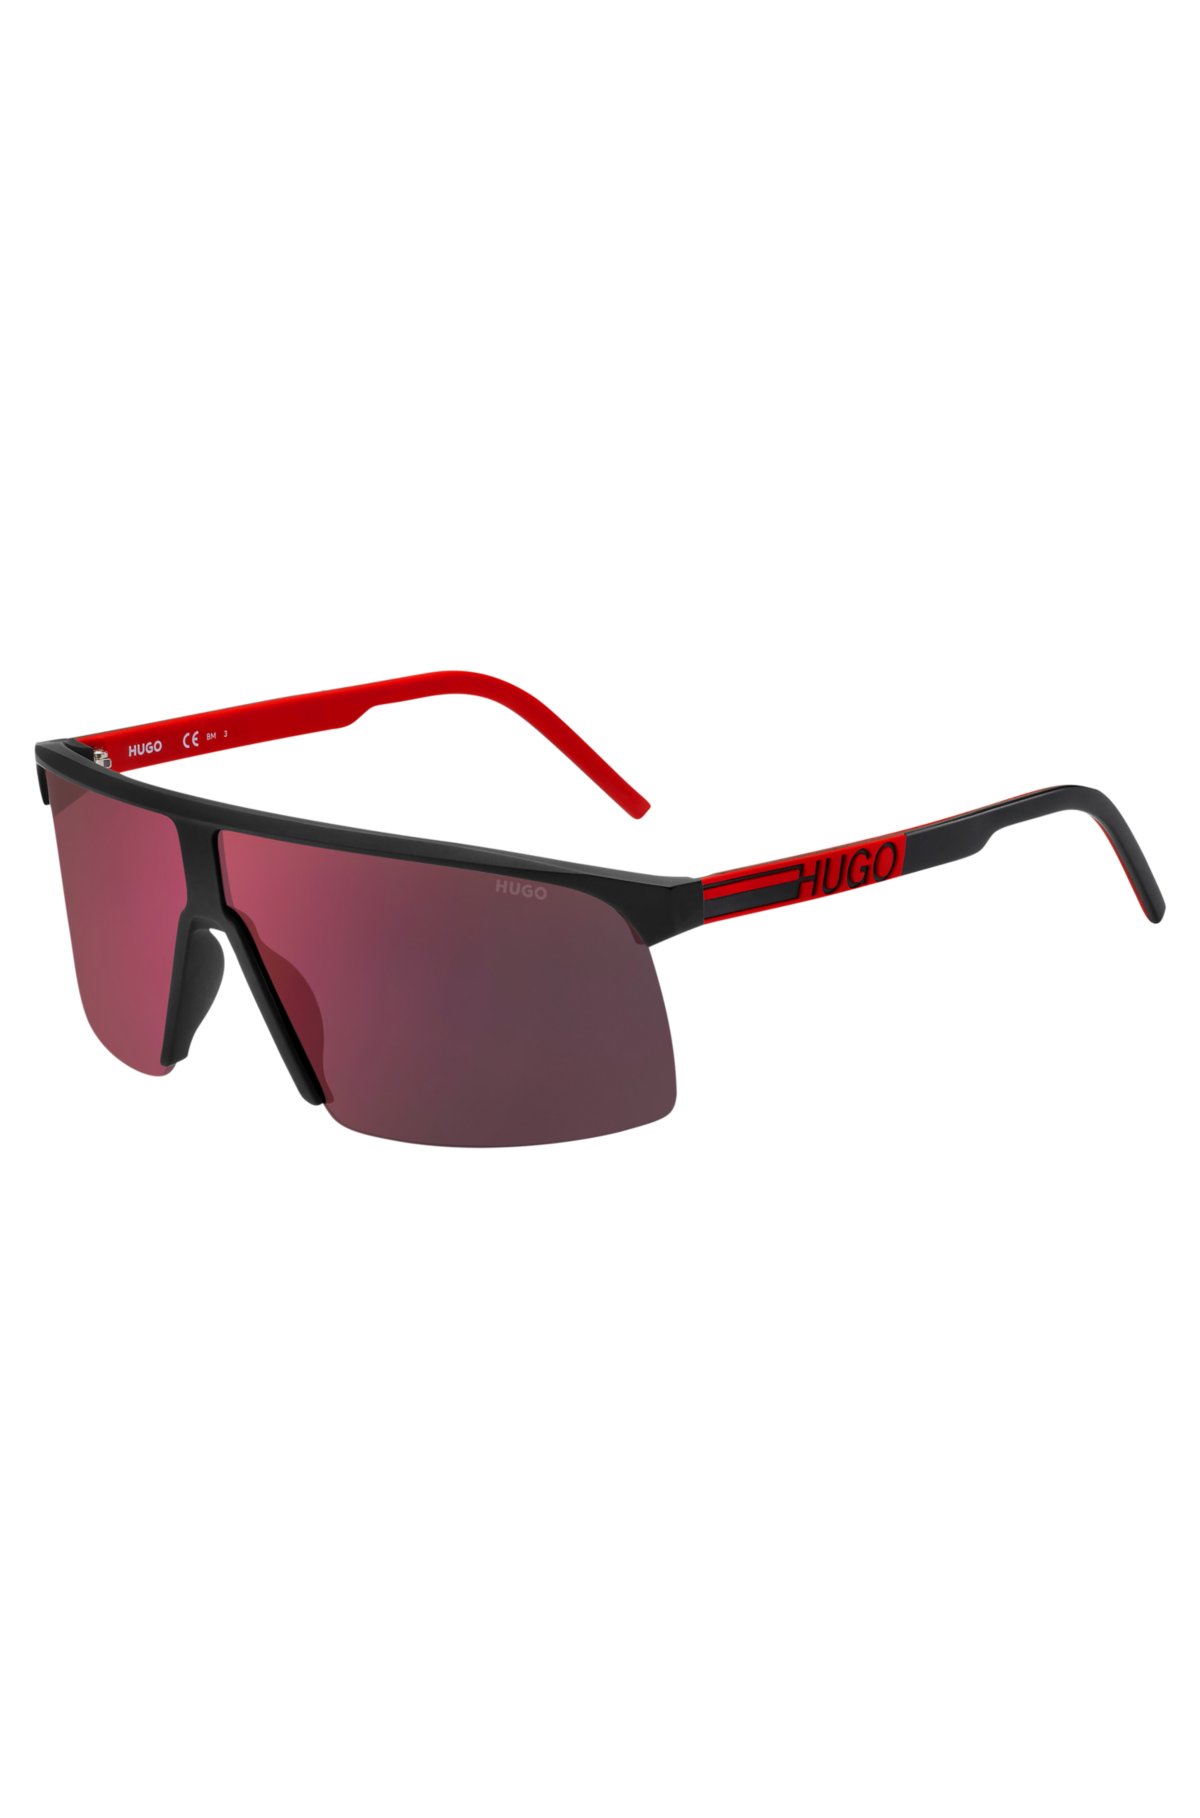 HUGO sunglasses in red and black